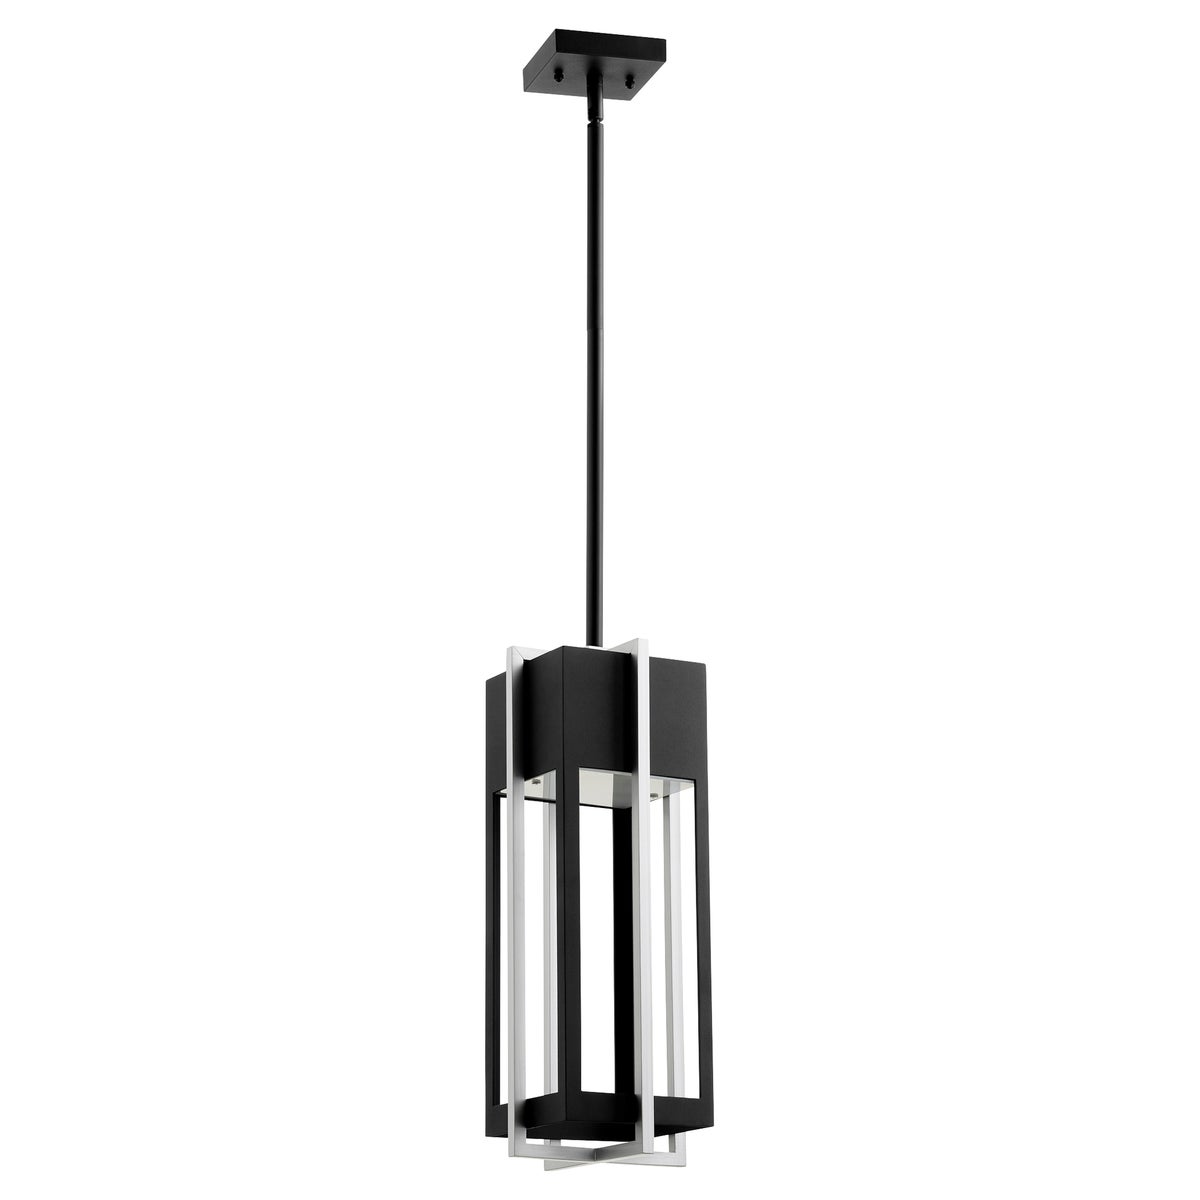 LED Outdoor Hanging Light with a unique geometric design, dual-layered frame, and noir/satin nickel finish. Provides guiding light for guests.